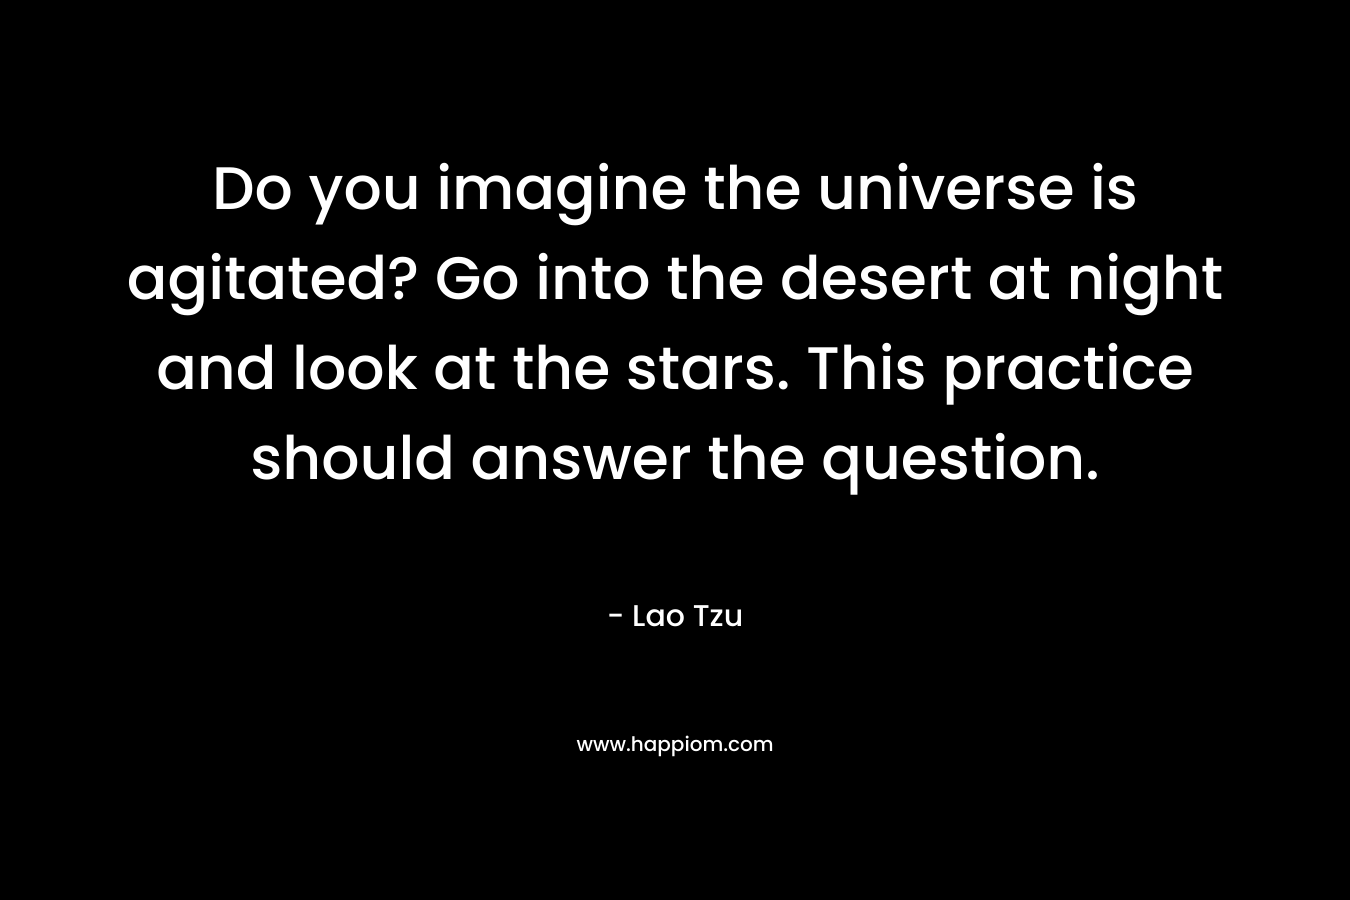 Do you imagine the universe is agitated? Go into the desert at night and look at the stars. This practice should answer the question. – Lao Tzu